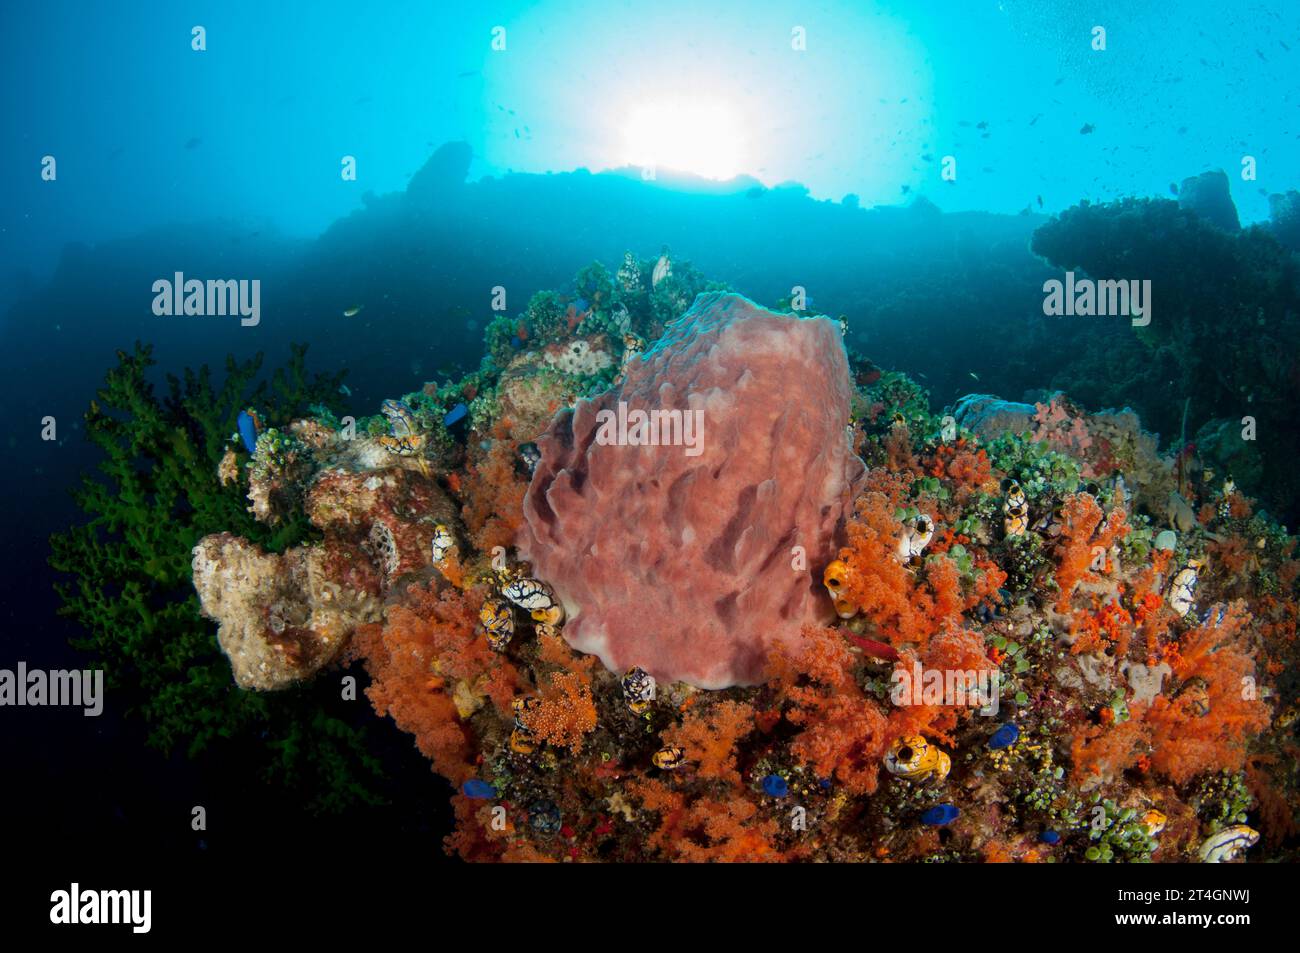 Barrel Sponge, Xestospongia testudinaria, and Glomerate Tree Coral, Spongodes sp, with sun in background, Pohon Miring dive site, Banda Besar Island, Stock Photo